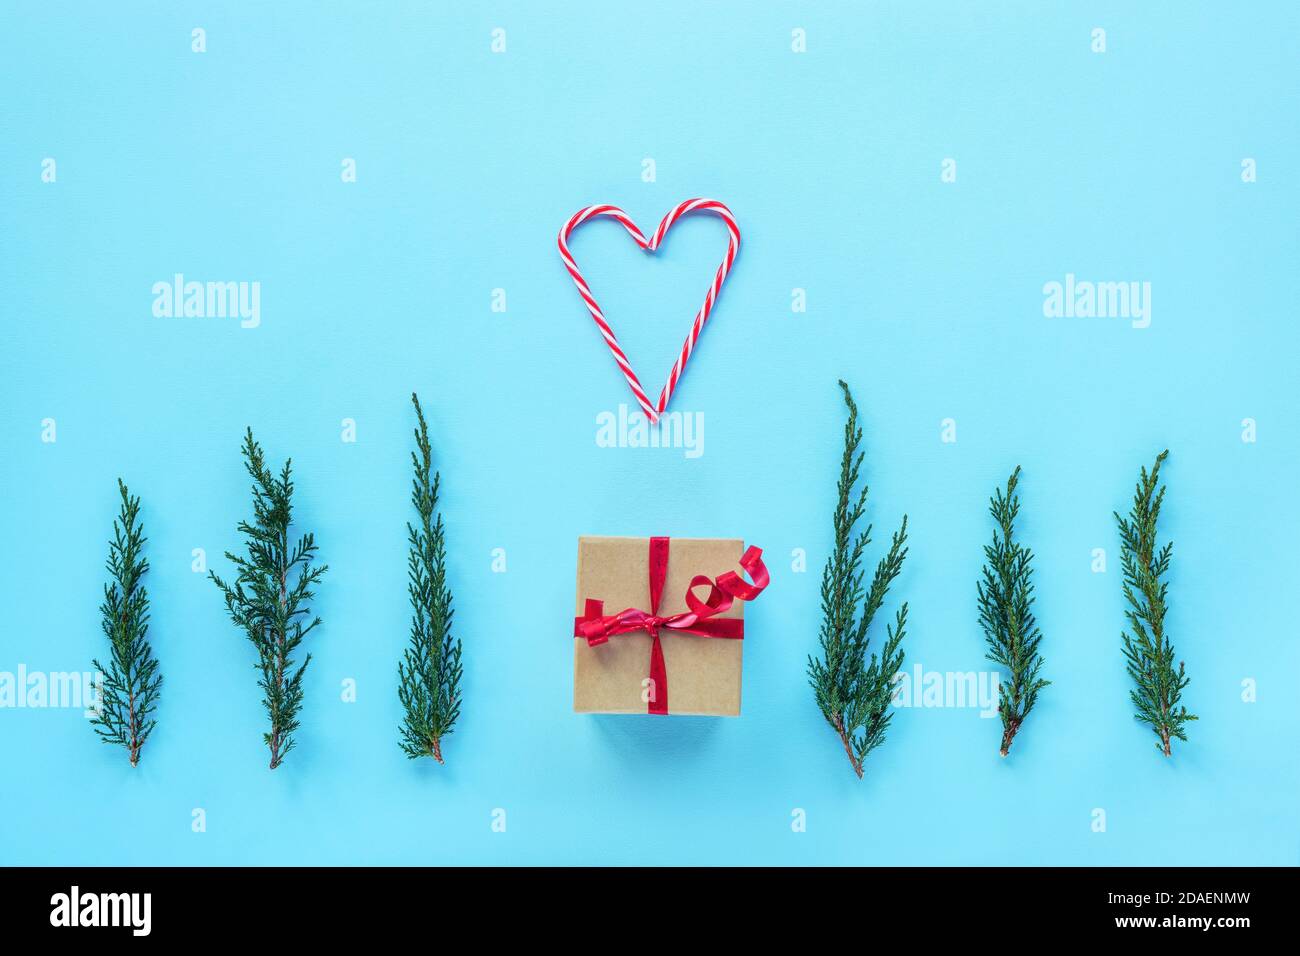 New Year's gift, cypress sprigs and a heart made of two candy canes on blue background. Christmas layout, flat lay, copy space. Stock Photo